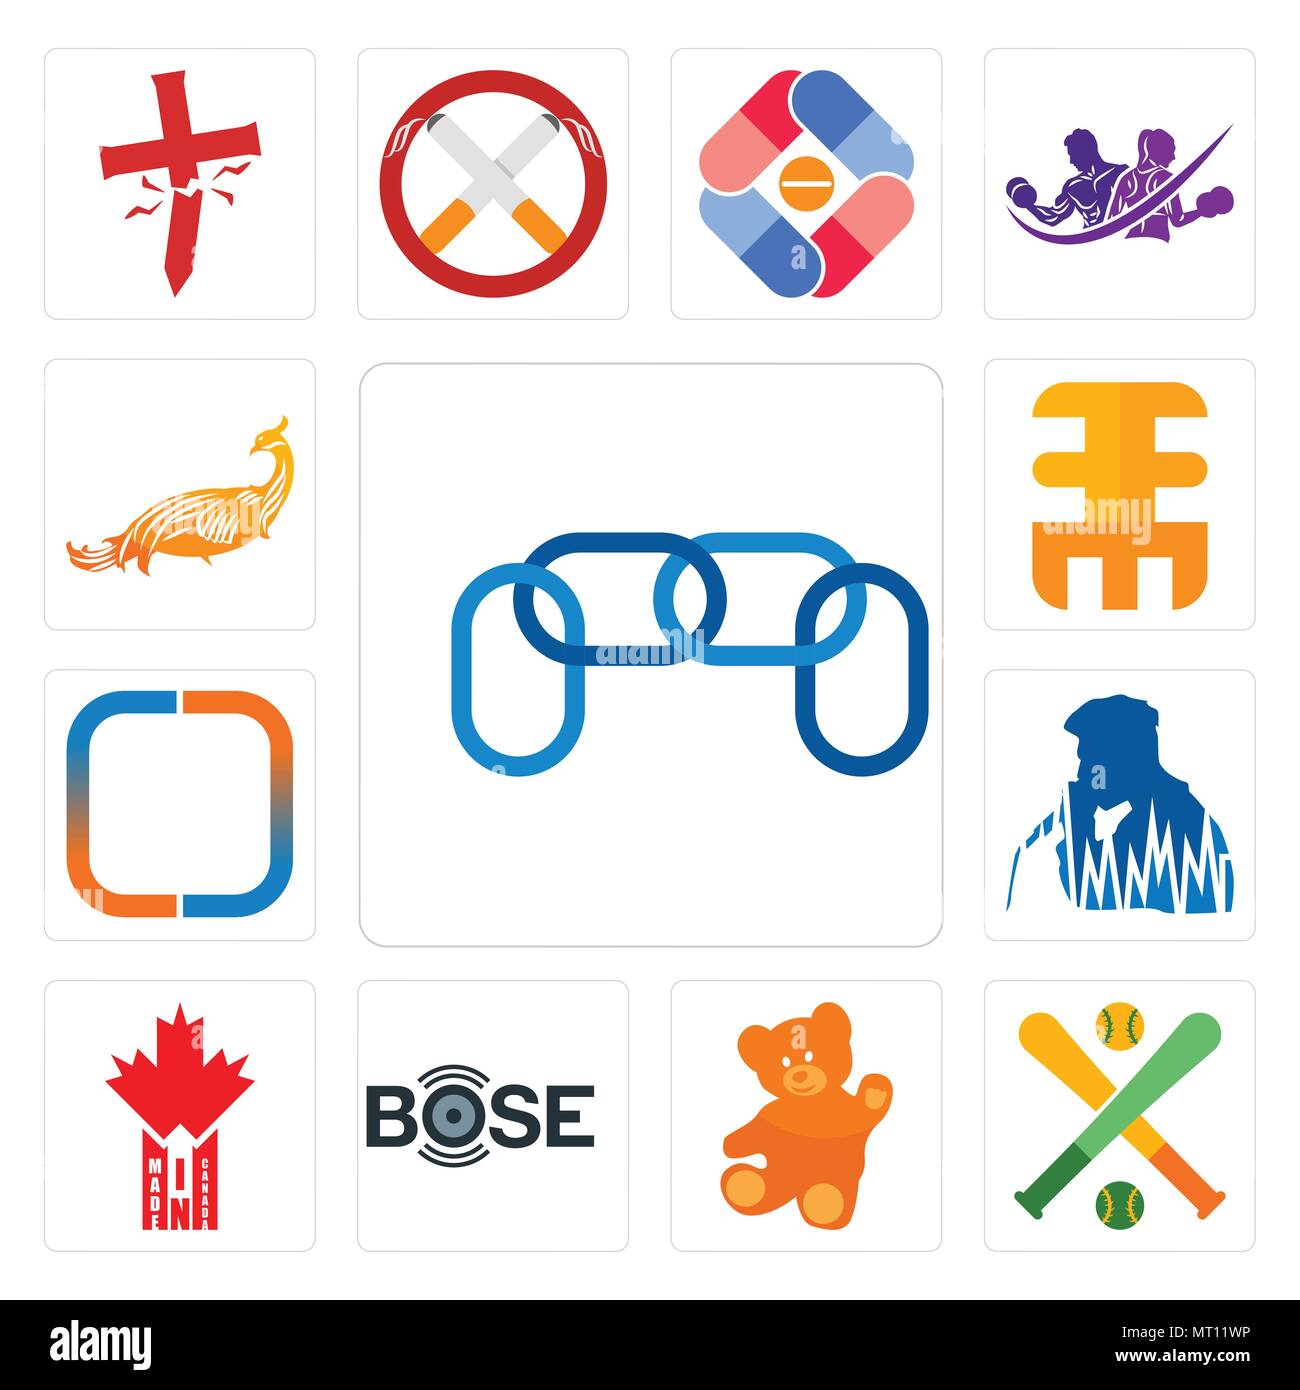 Set Of 13 simple editable icons such as chainlink, fantasy baseball, , bose, made in canada, beatbox, new instagram, eee, golden peacock can be used f Stock Vector